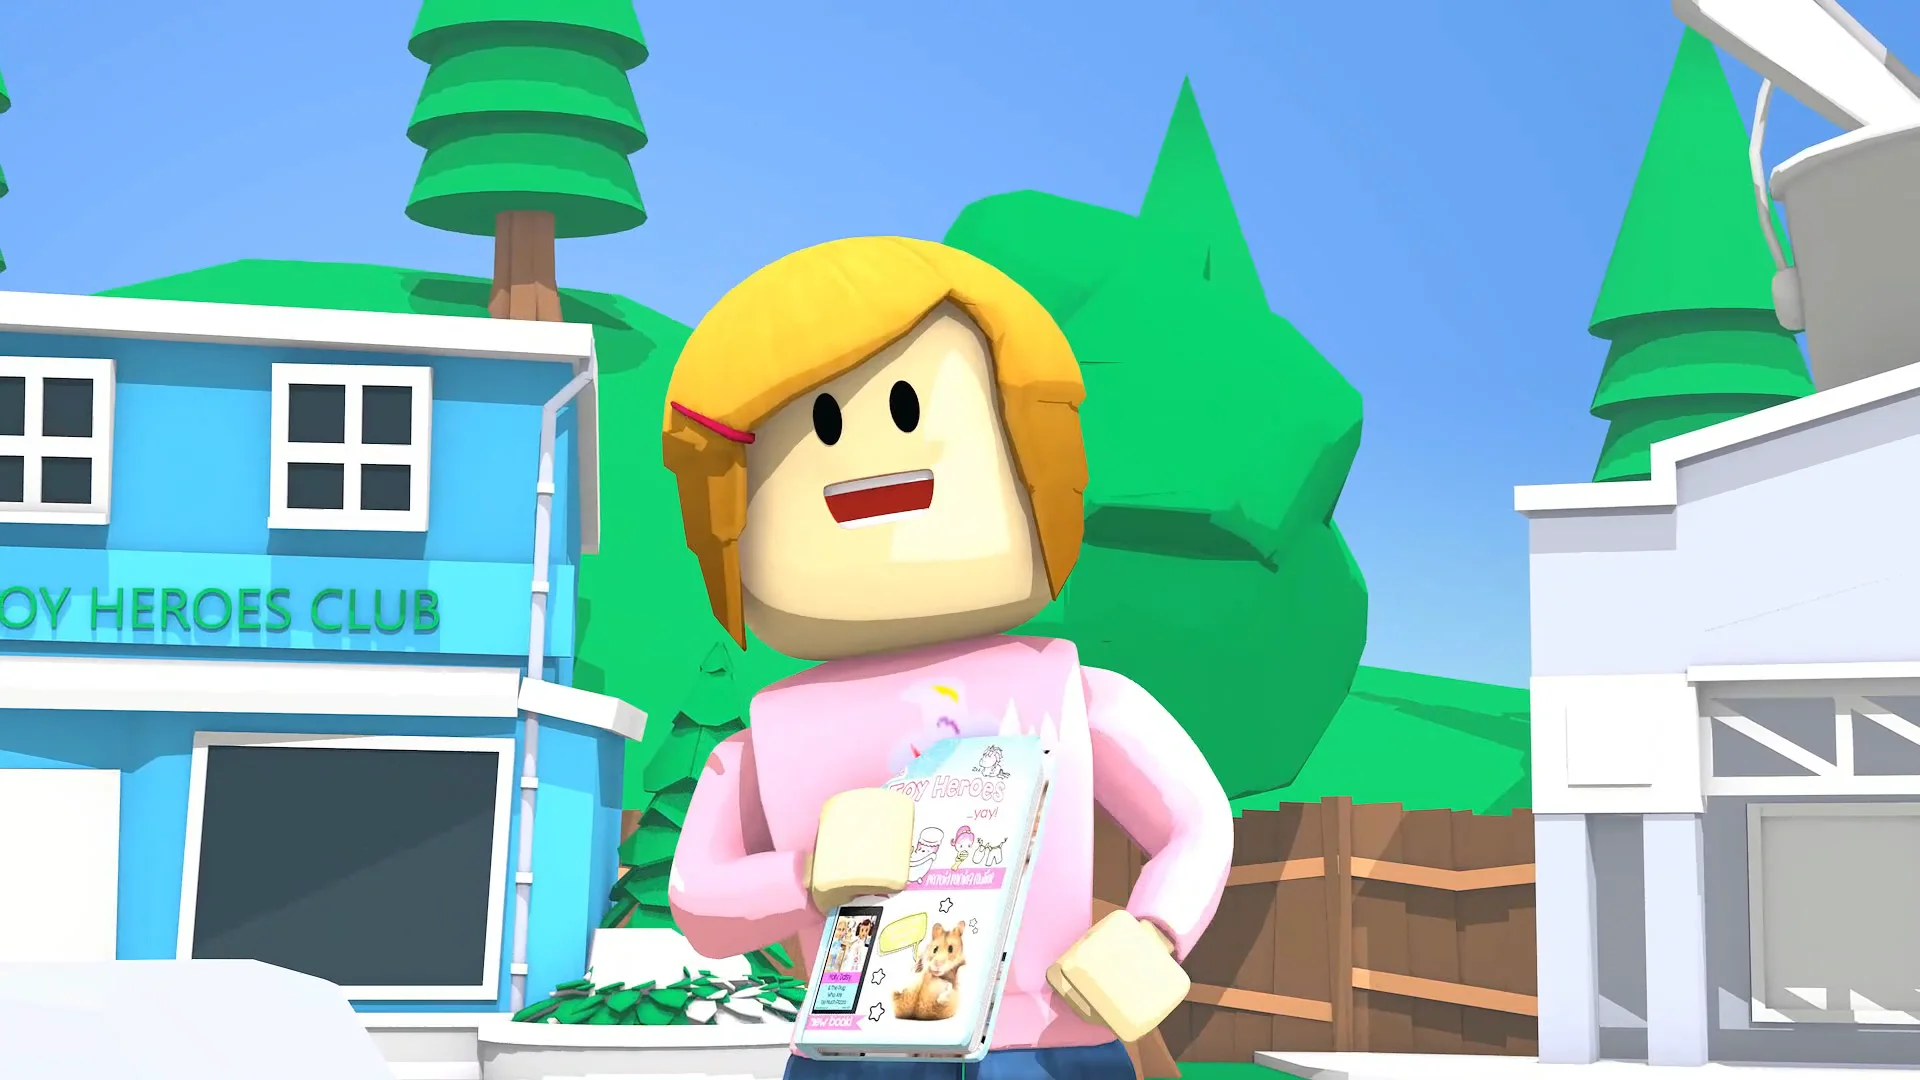 Roblox- Escape The Pizzeria! - The Toy Heroes on Vimeo